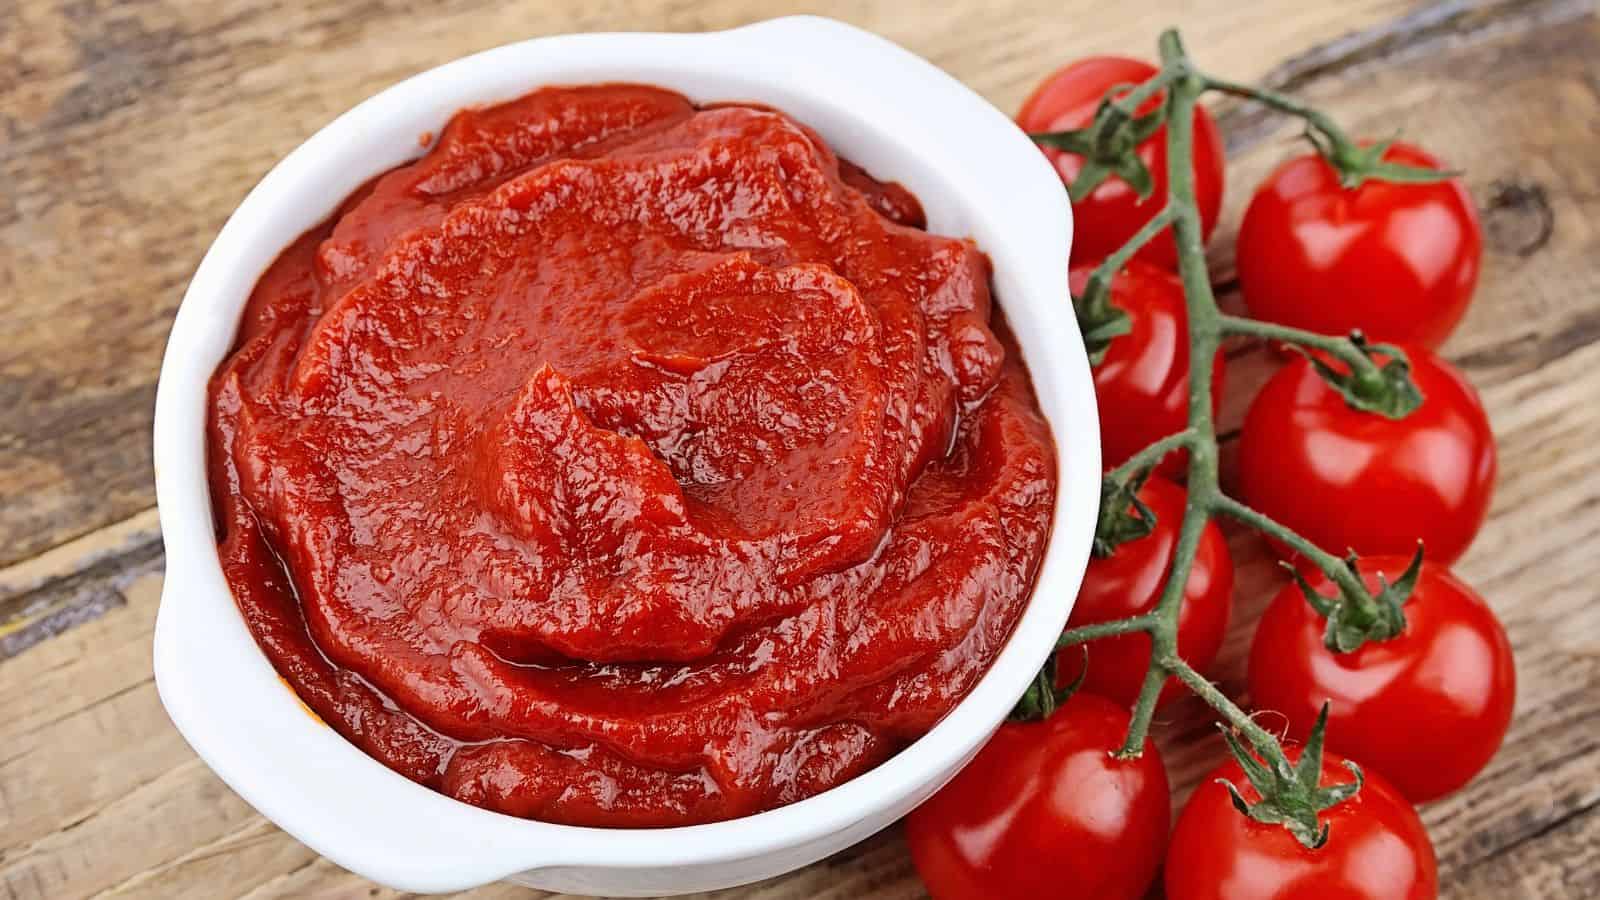 Tomato paste with ripe tomatoes on wooden table.